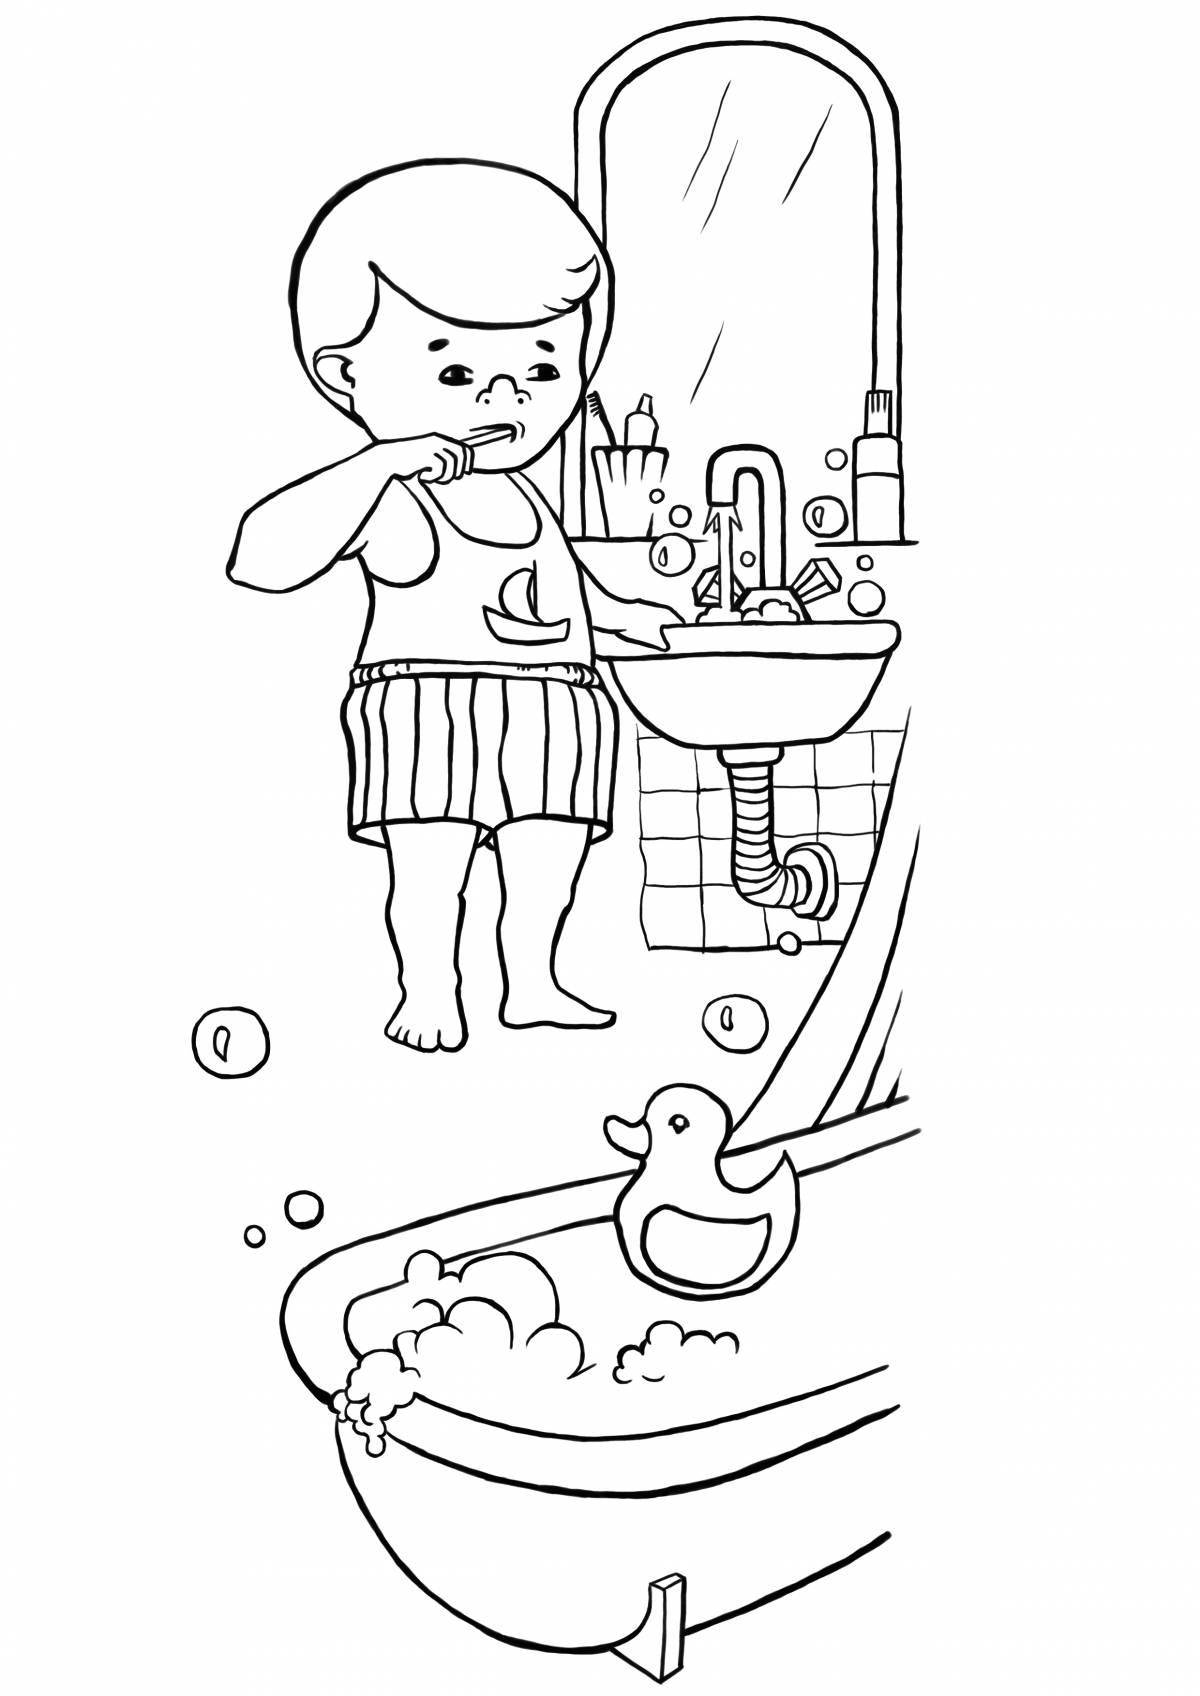 Solar shower coloring page